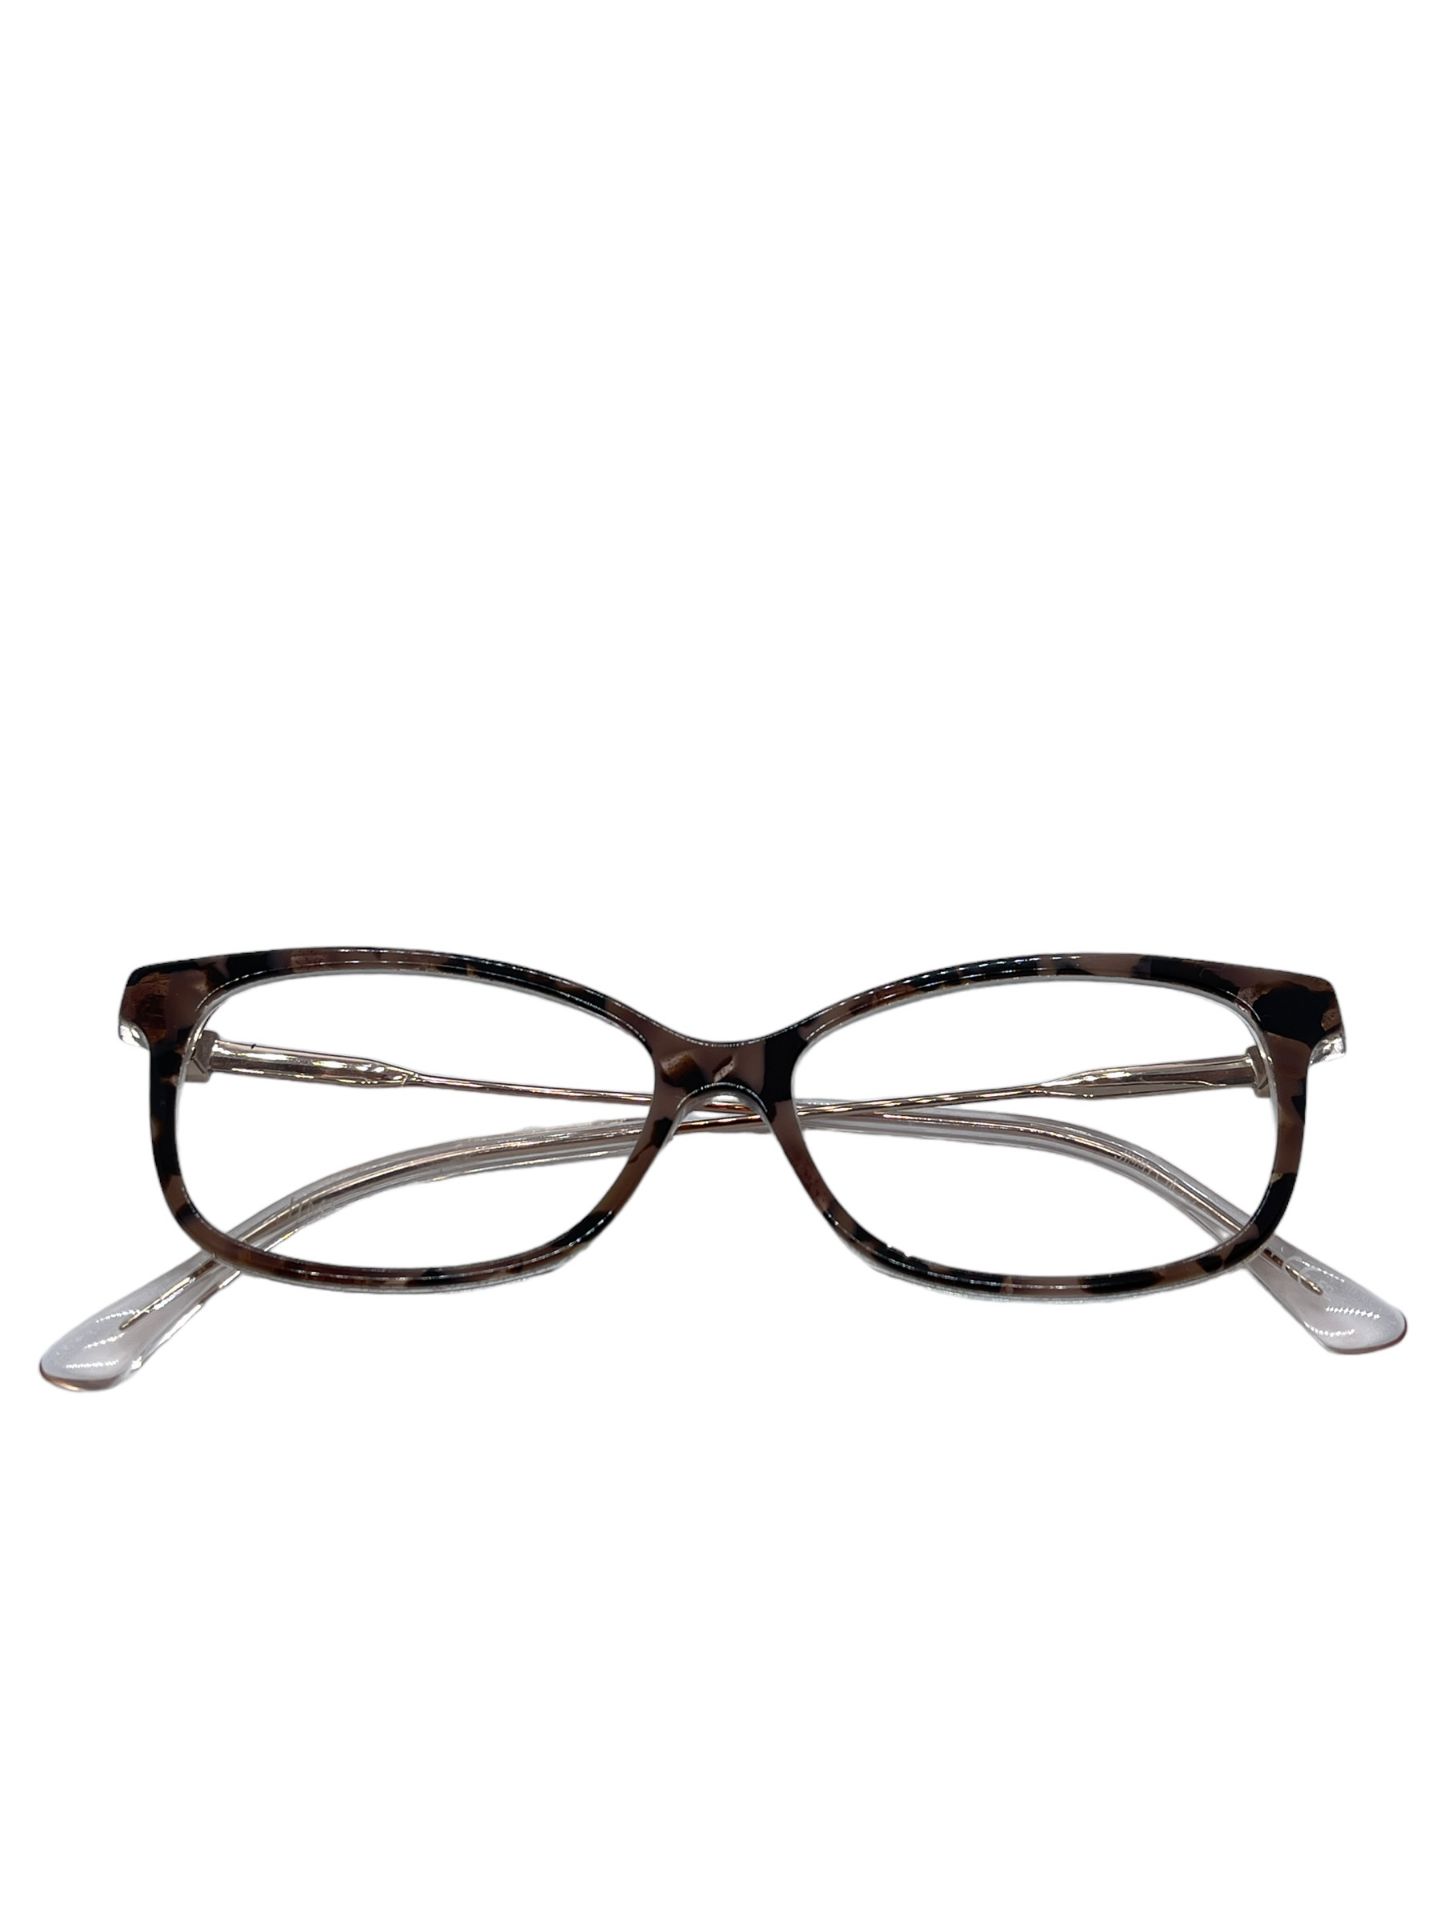 Jimmy Choo boxed spectacles - Image 2 of 4